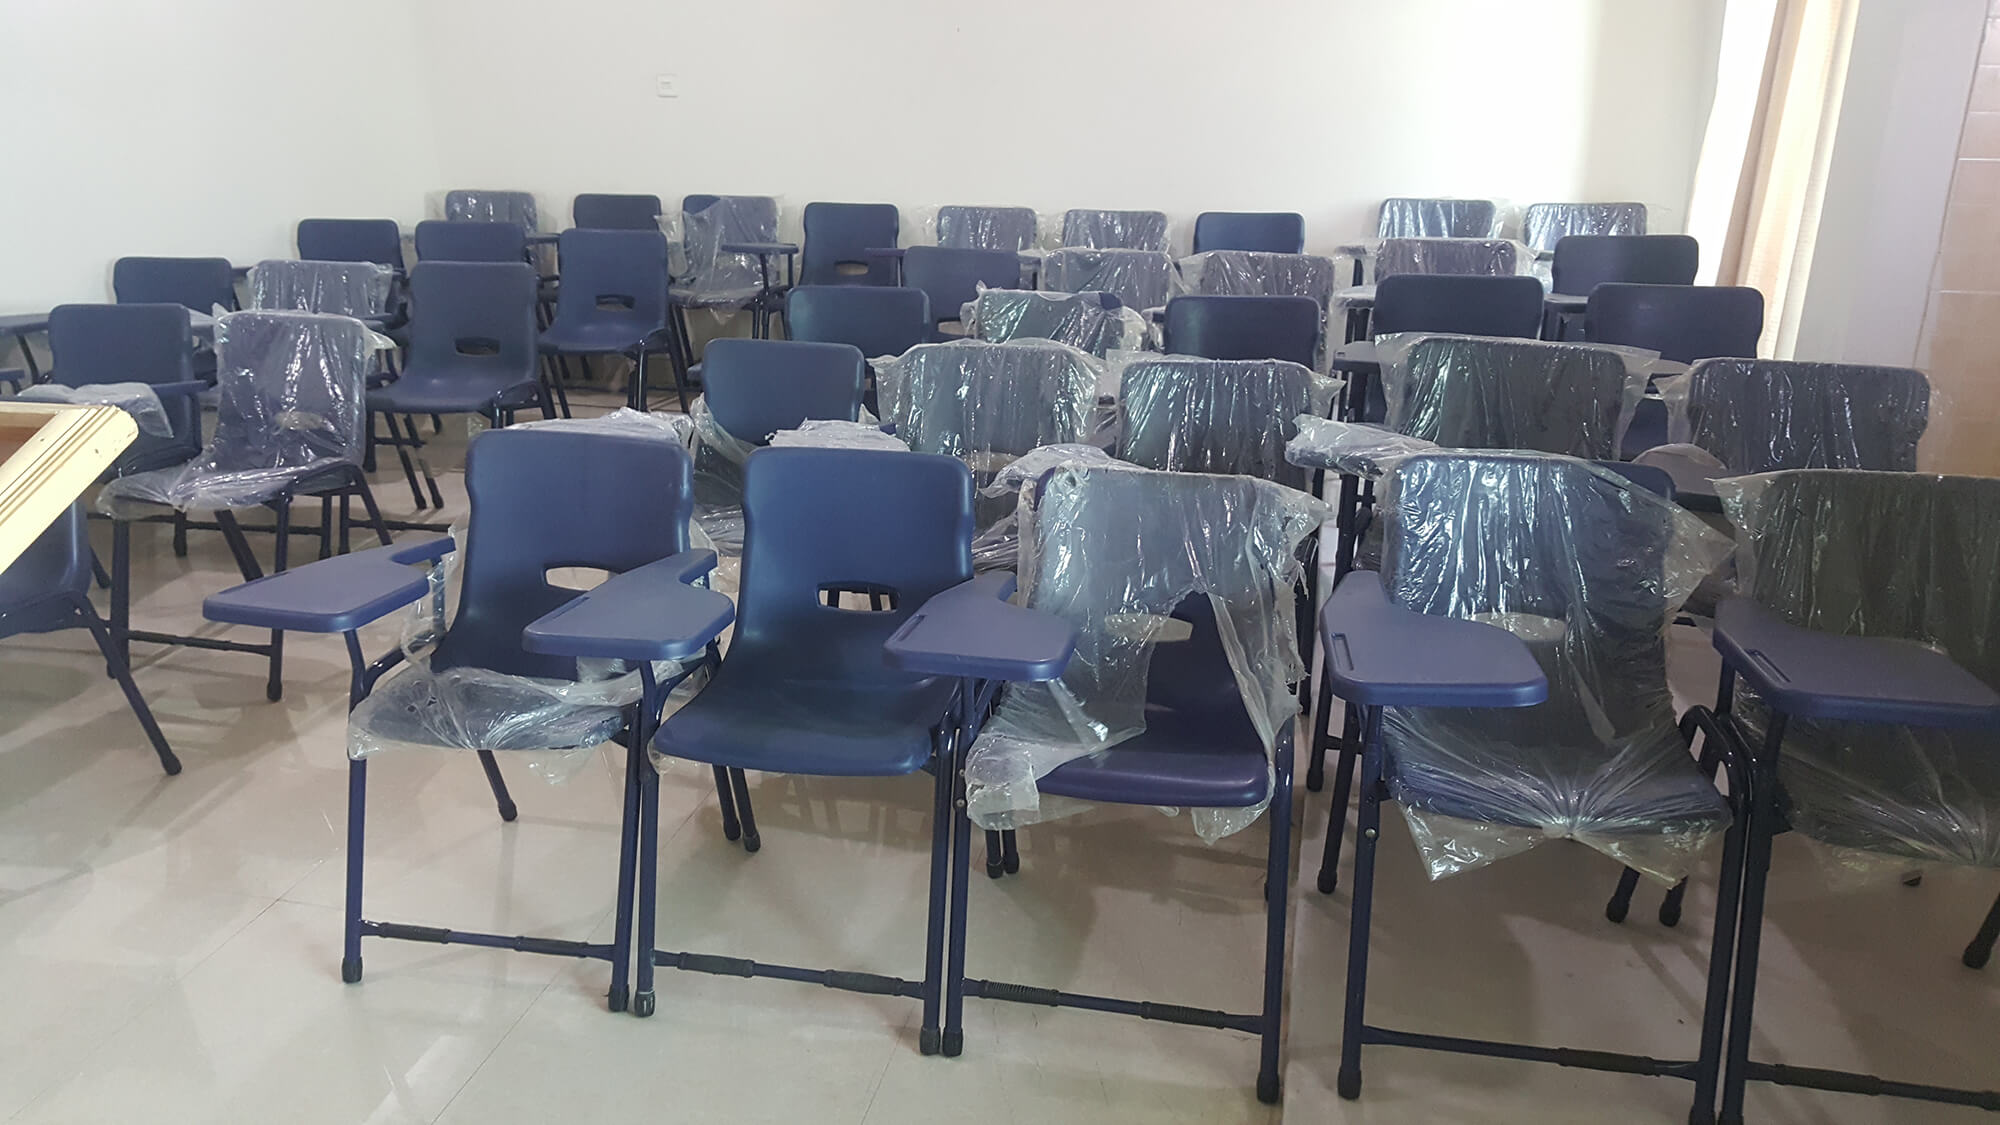 Lecture Halls 20